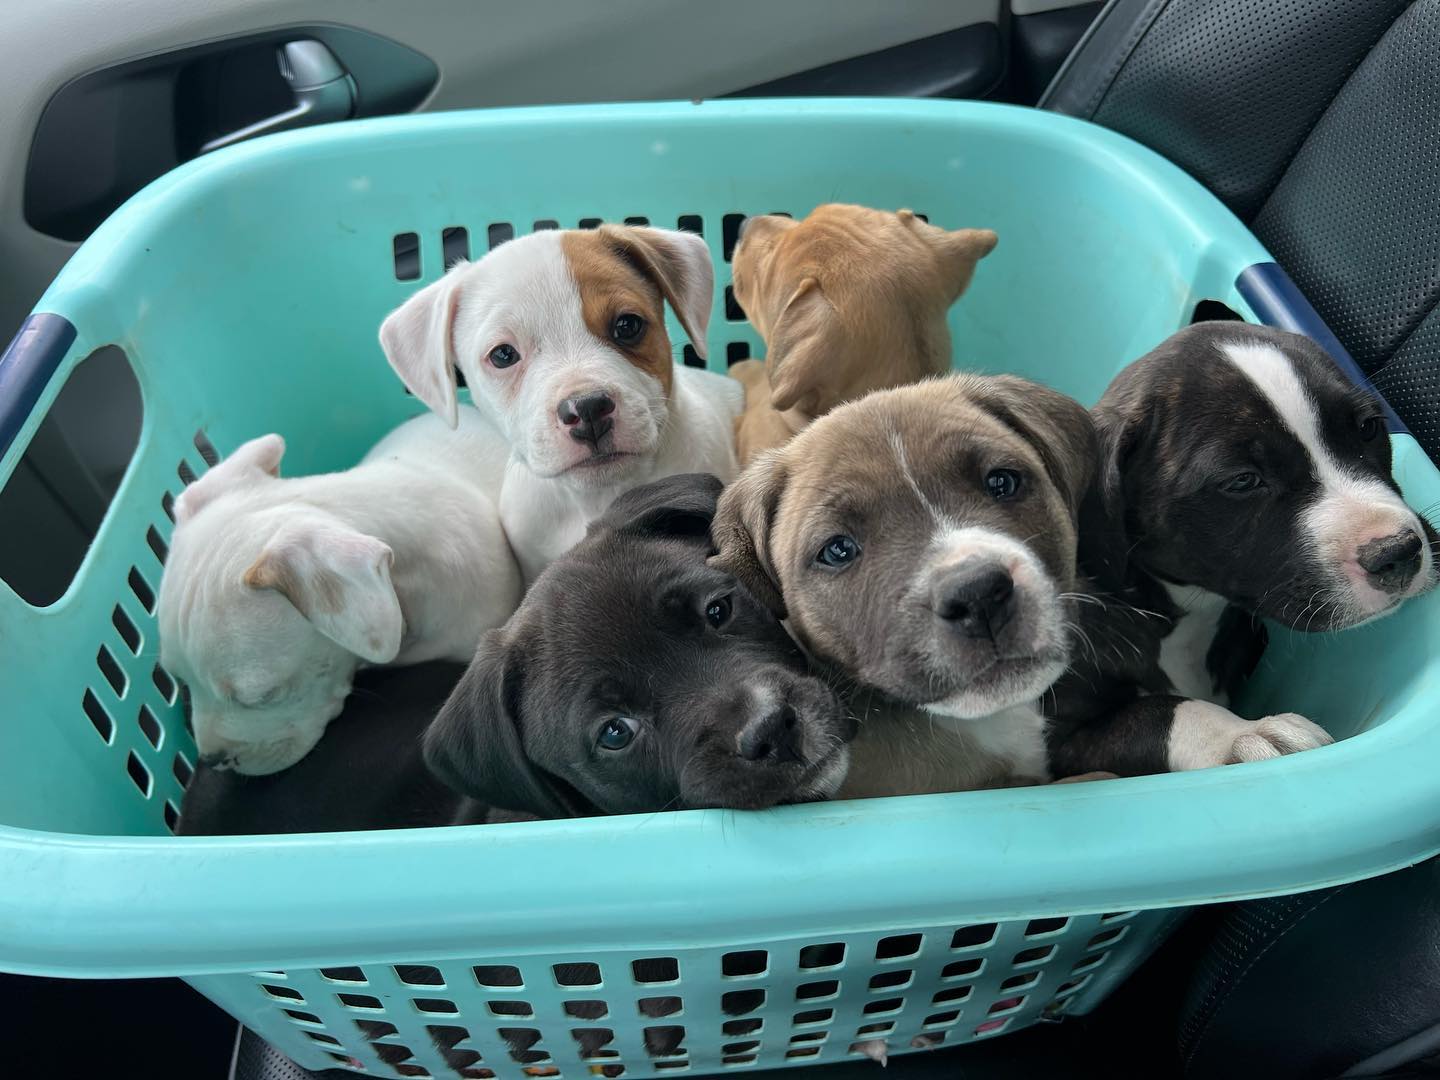 Puppies in a laundry basket.